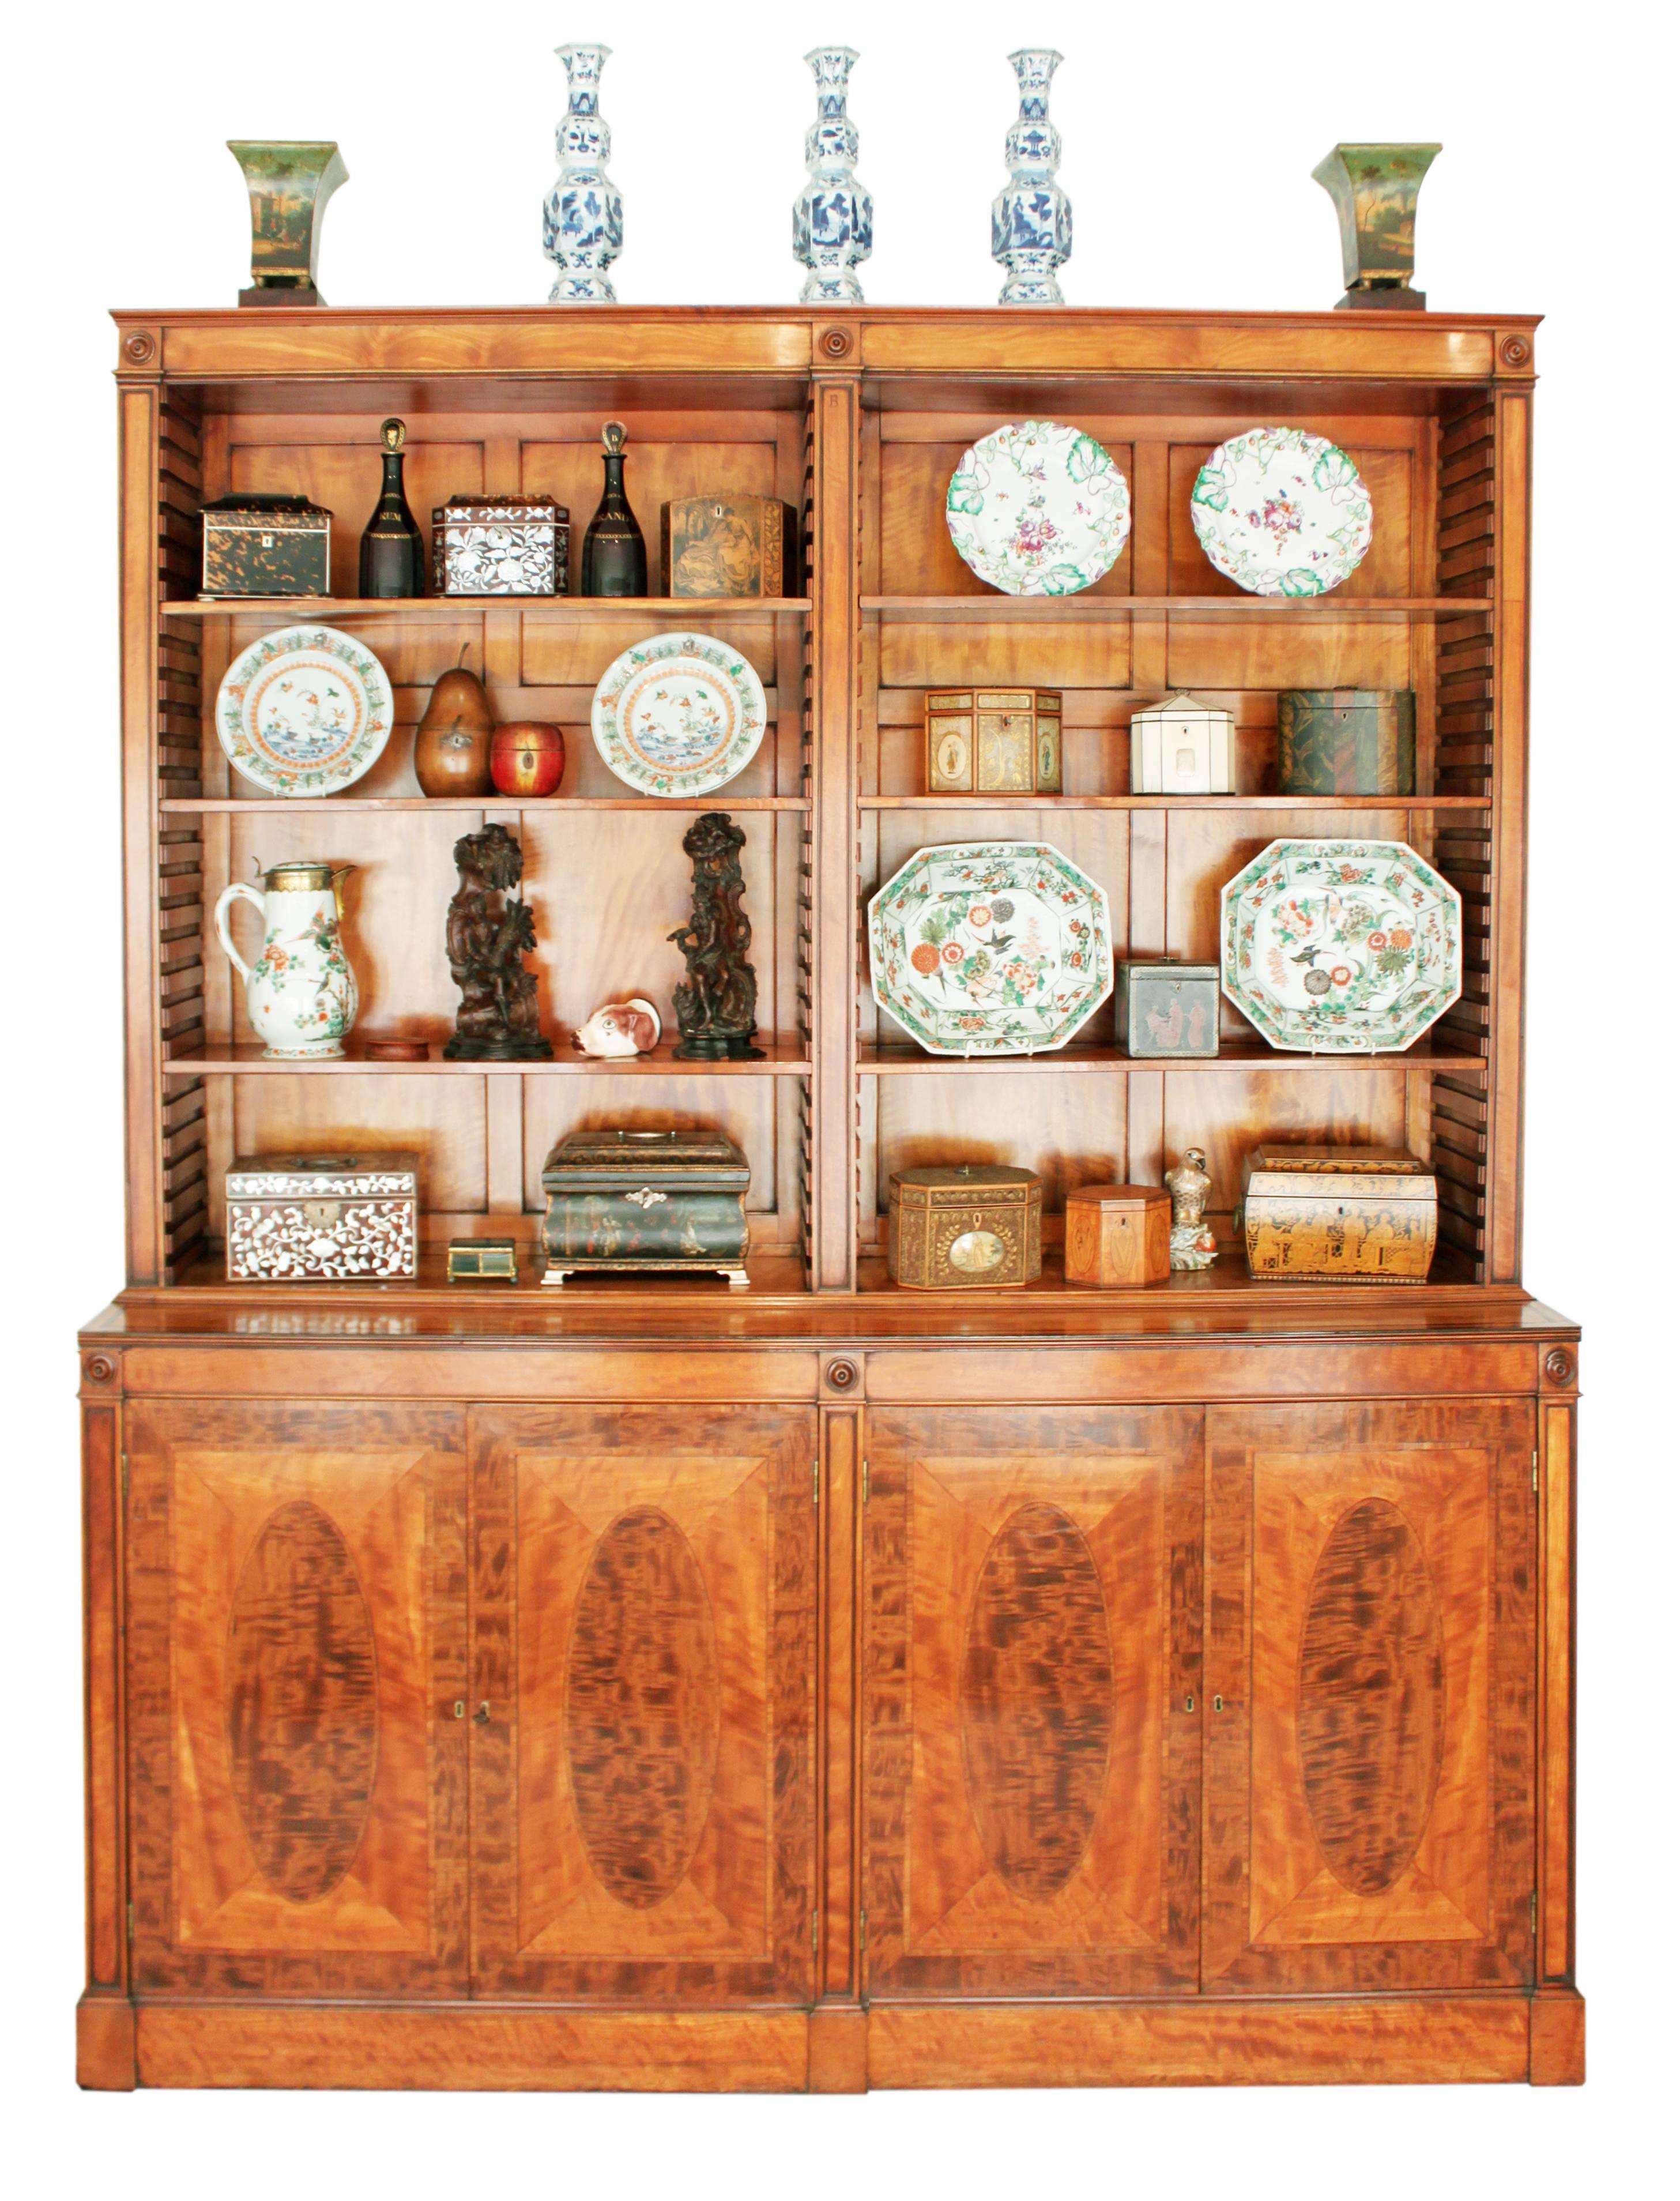 A fine quality George III bookcase in satinwood the doors crossbanded and inset with ovals in an exotic timber good architectural detail with pillasters inset with roundels the upper backboards and shelves also in satinwood.